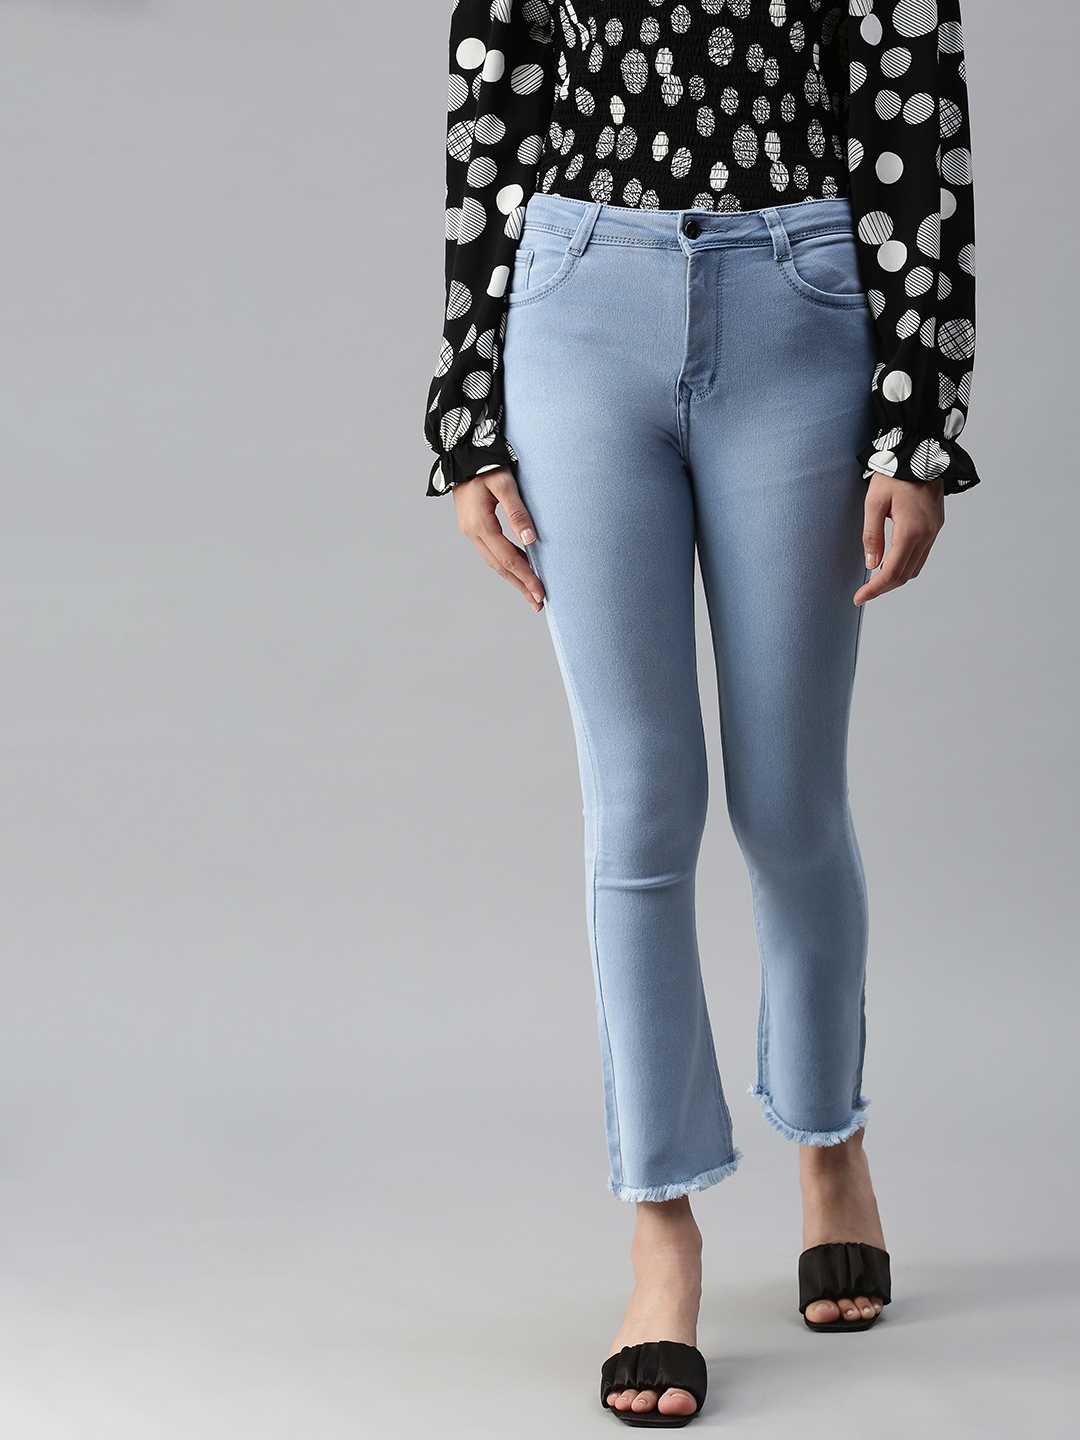 Women's Blue Others Solid Jeans